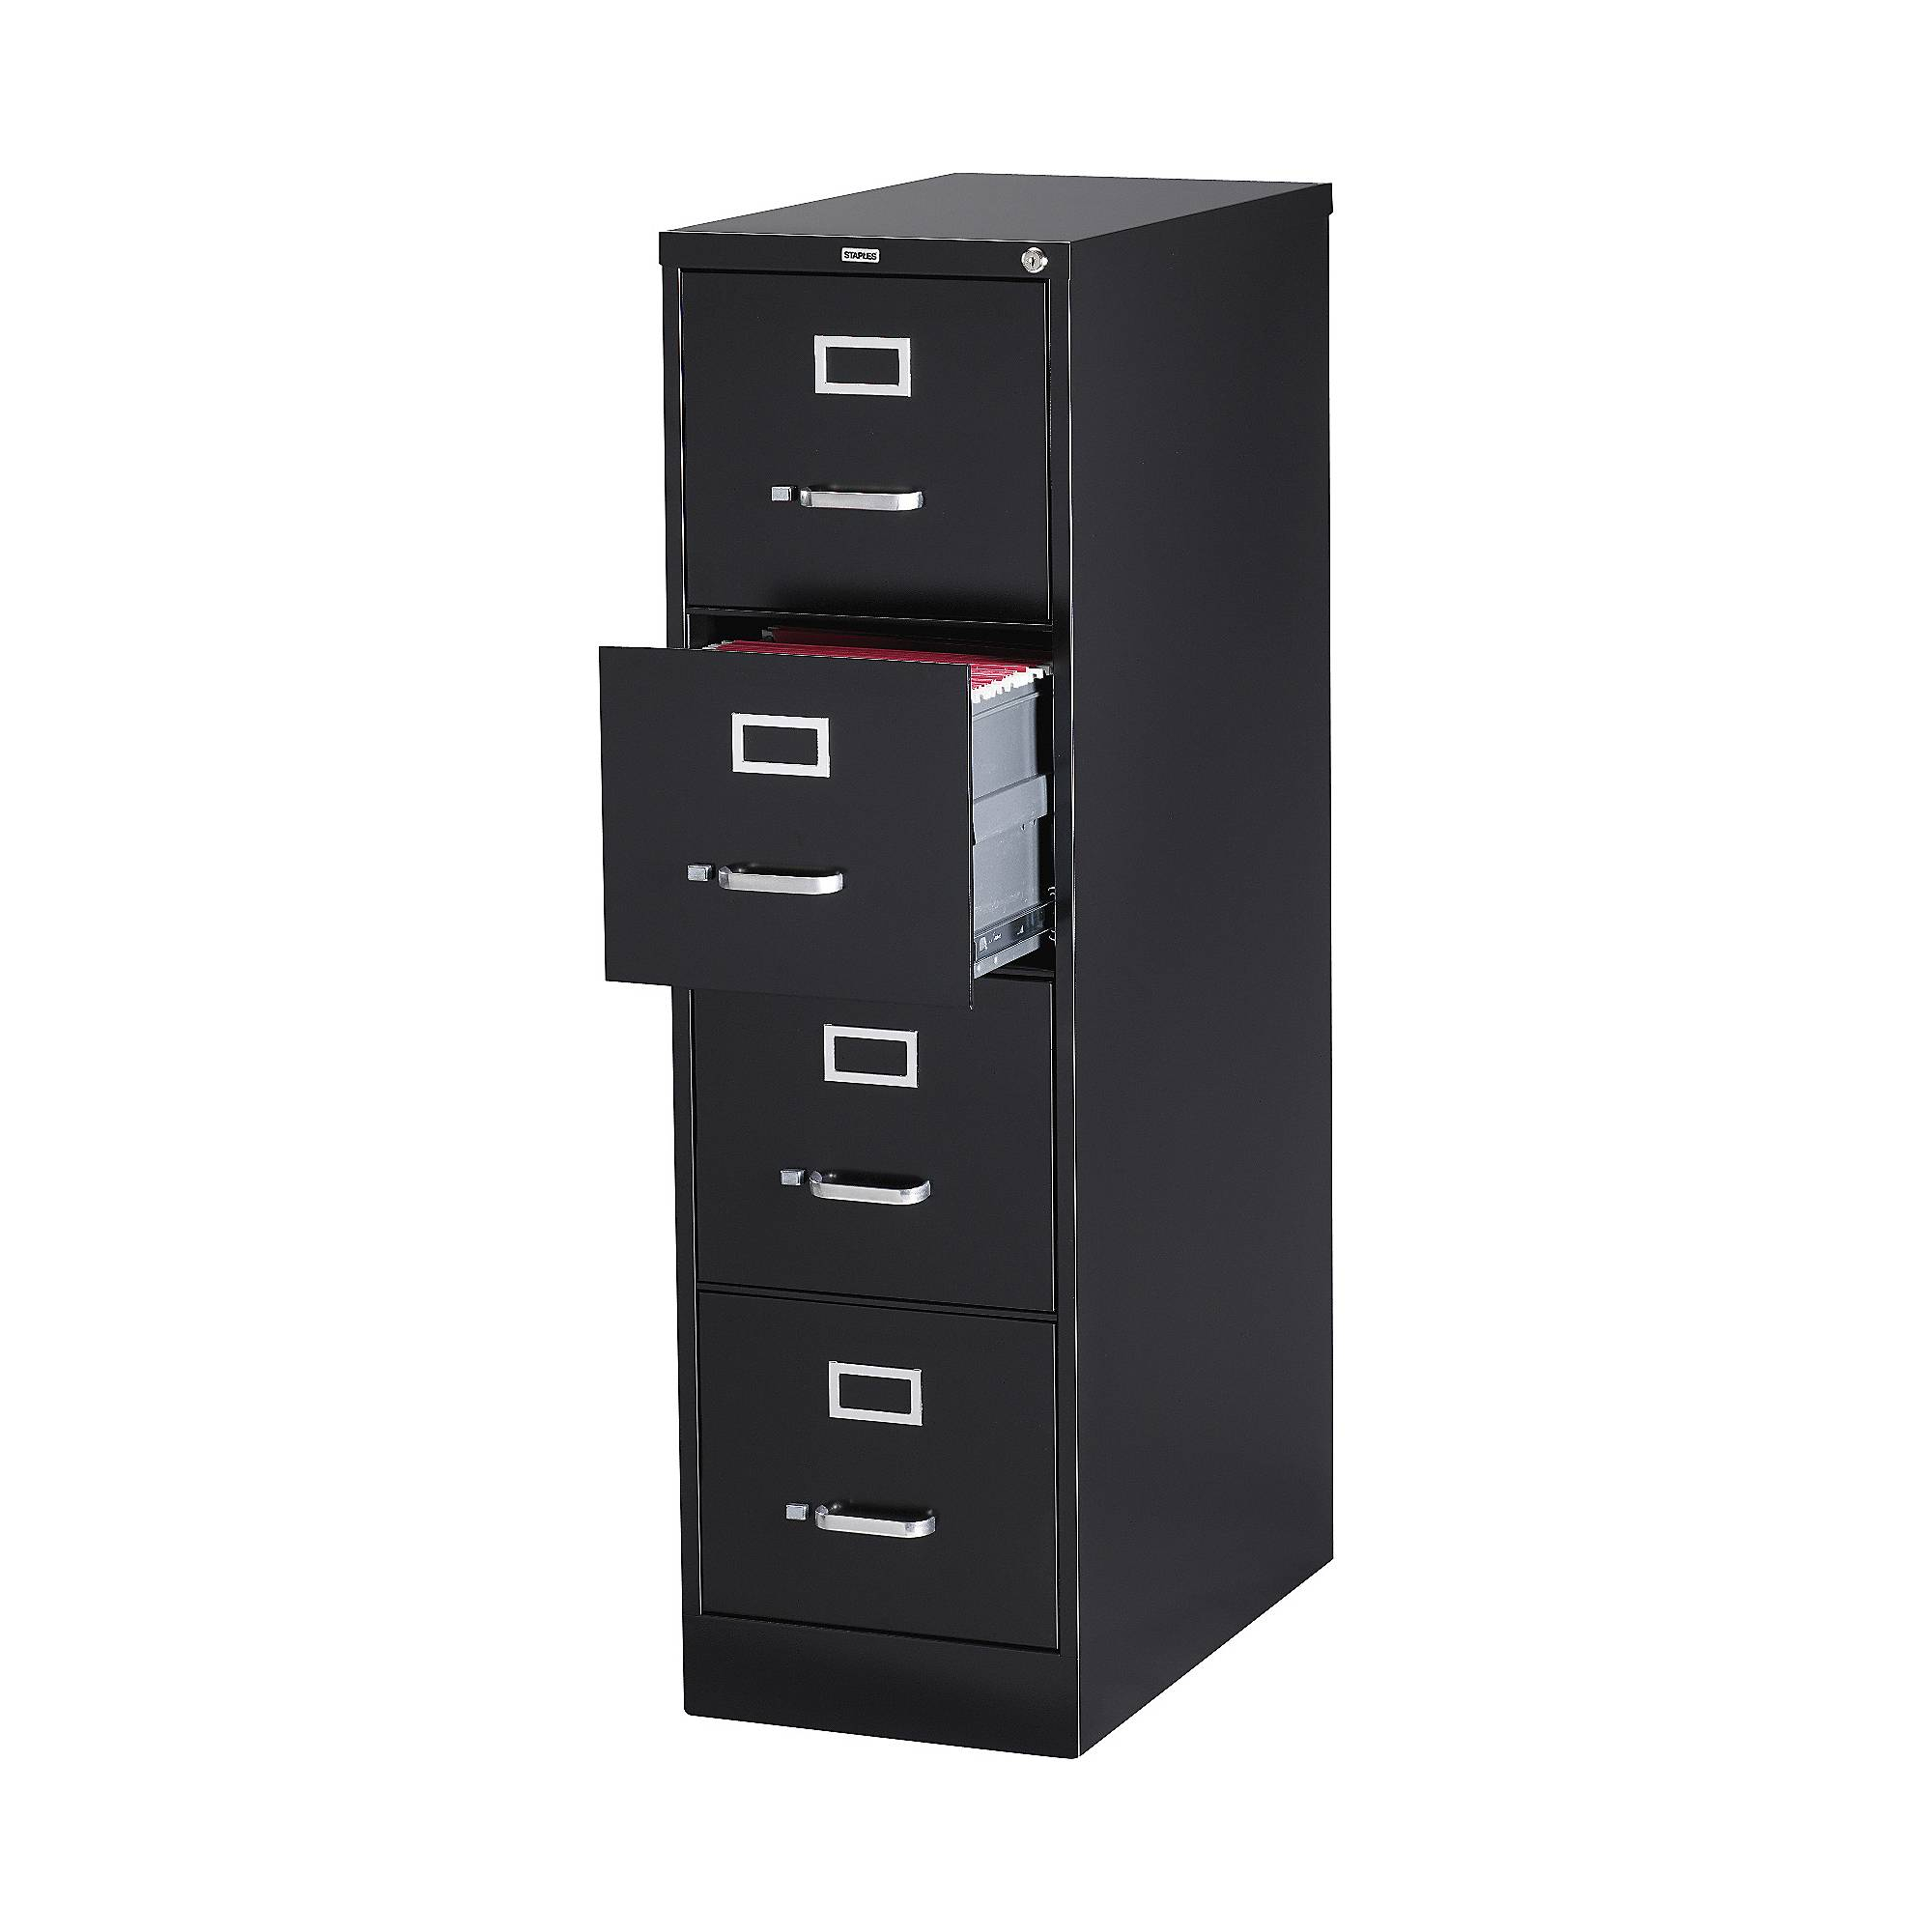 Staples 4 Drawer Vertical File Cabinet Walmart intended for measurements 2000 X 2000